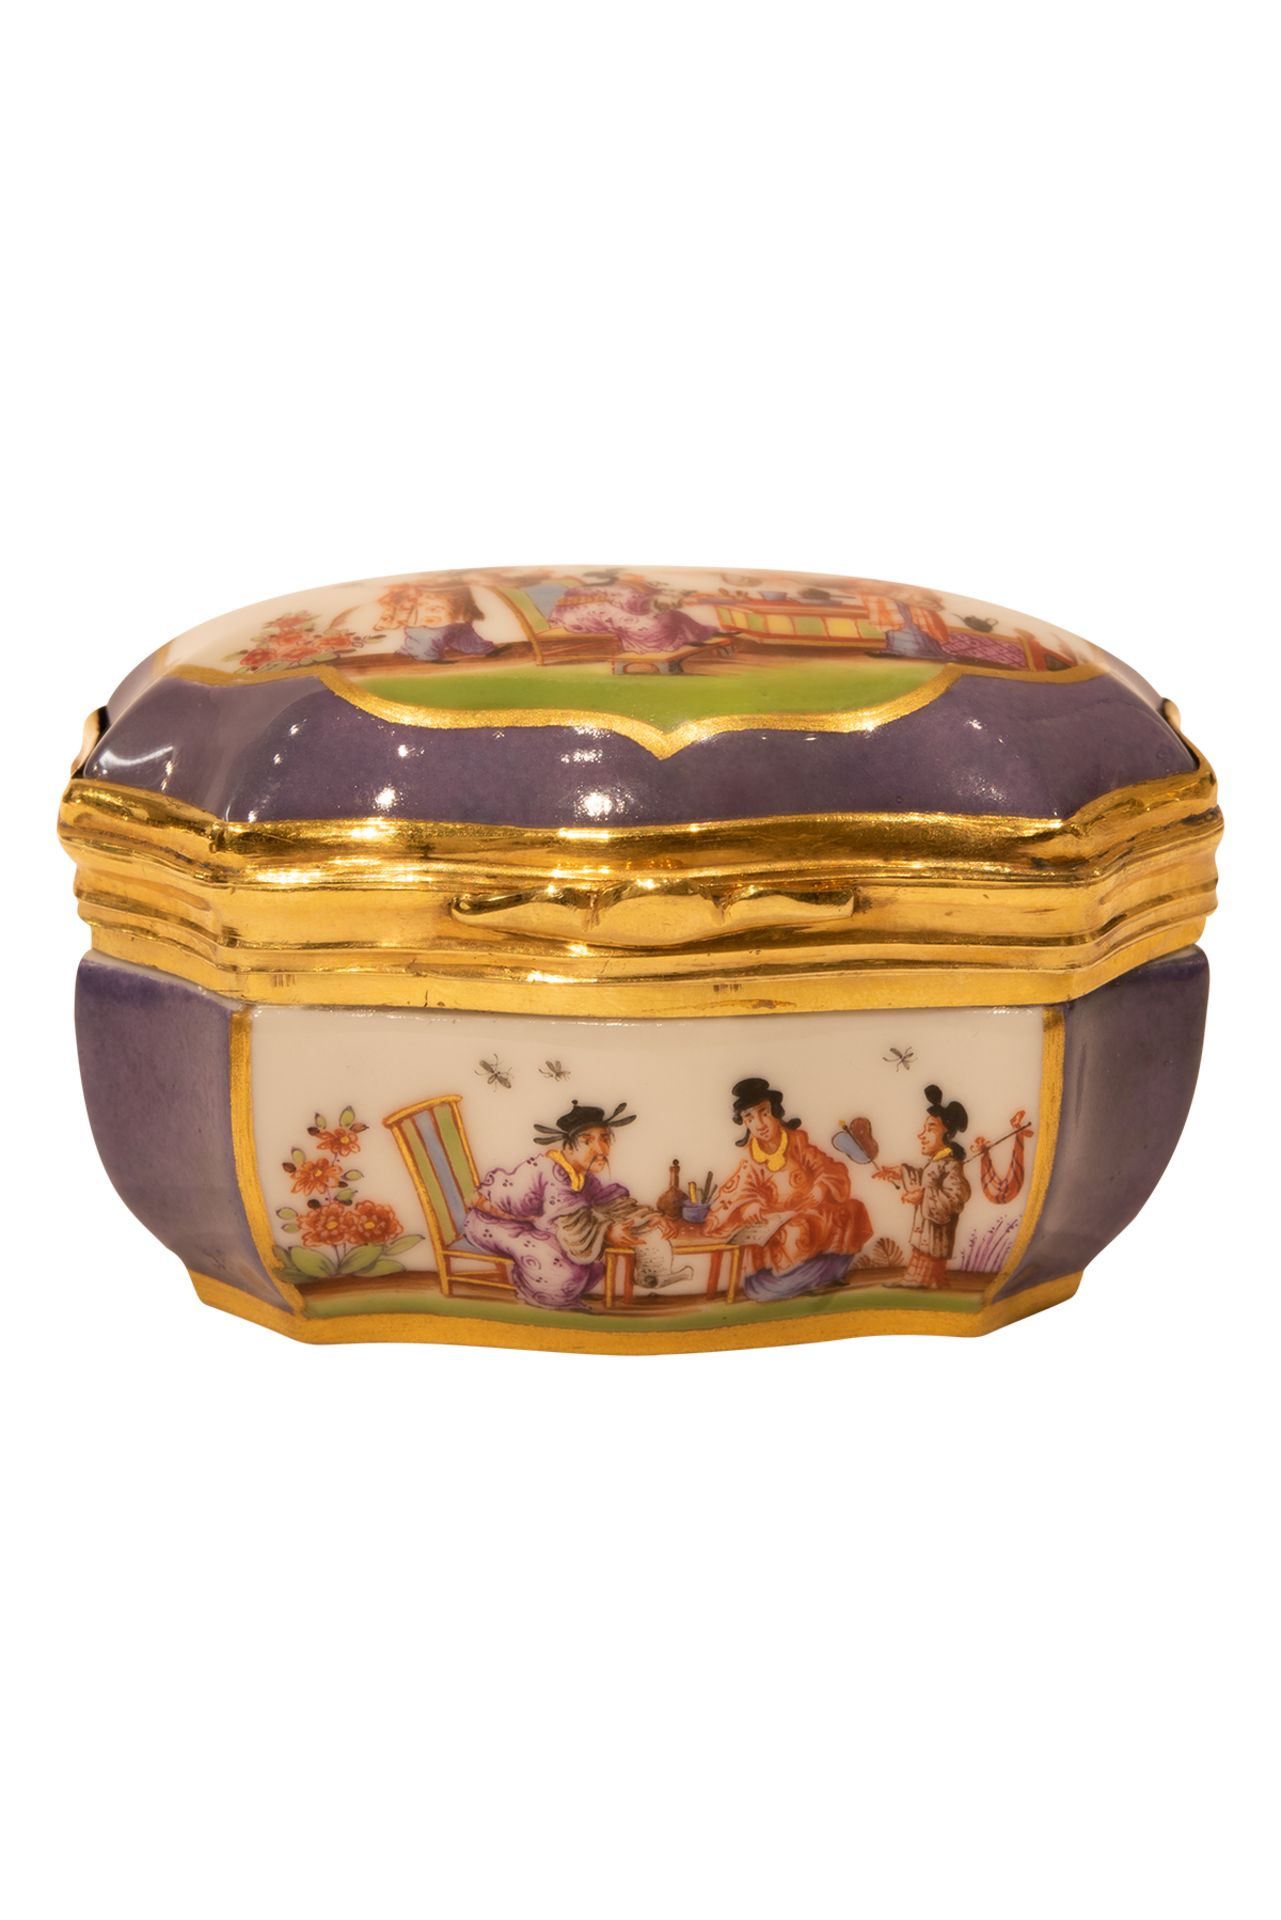 Tabatiere with chinoiseries, Meissen around 1750 - Image 3 of 8